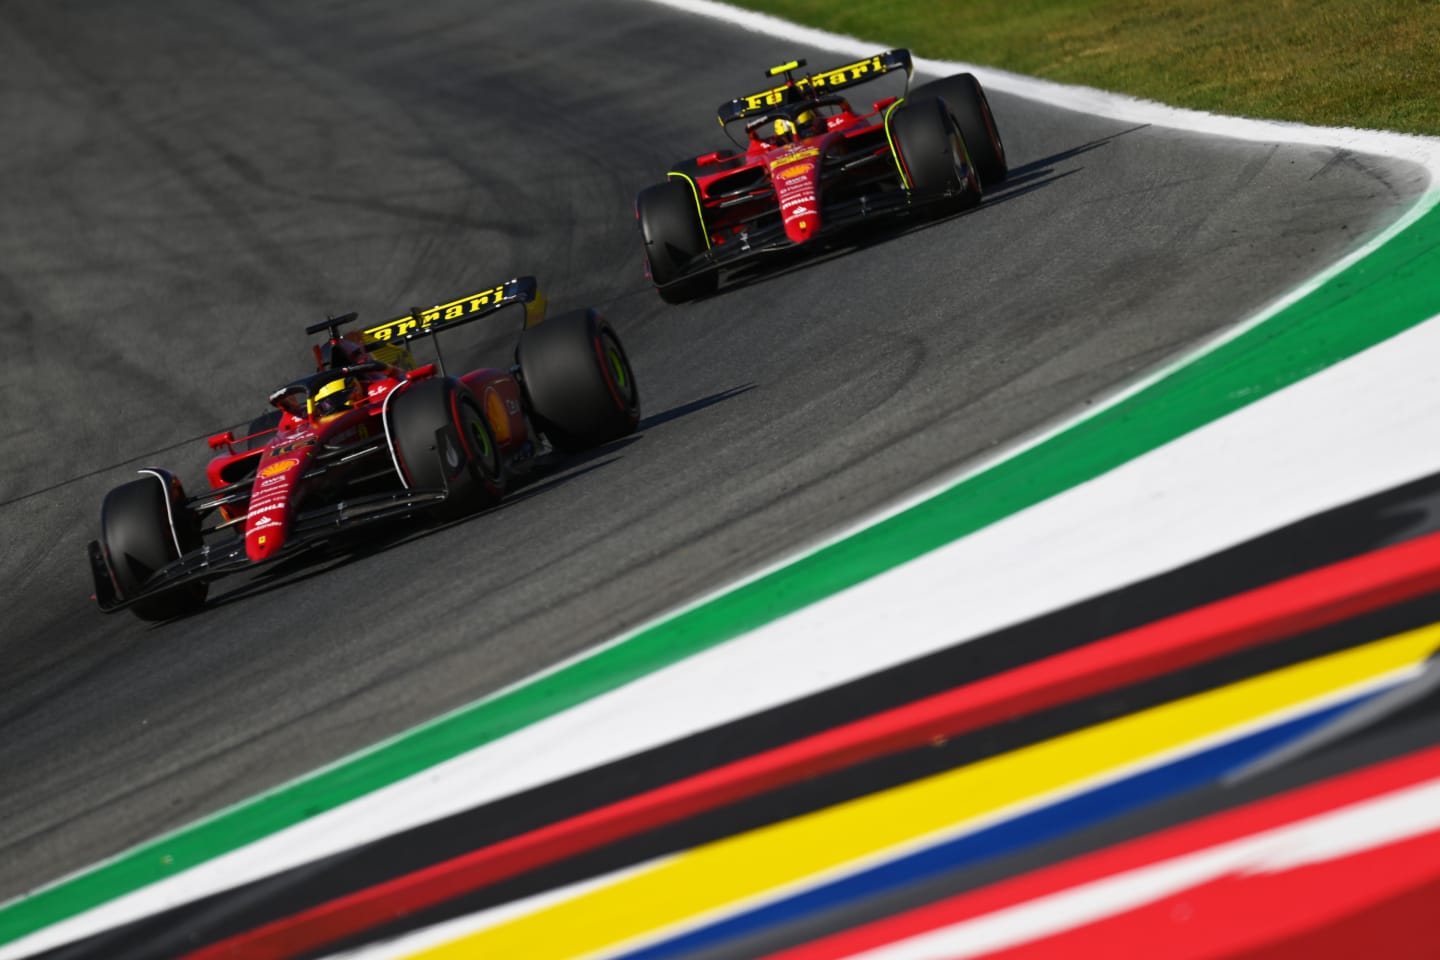 MONZA, ITALY - SEPTEMBER 10: Charles Leclerc of Monaco driving the (16) Ferrari F1-75 leads Carlos Sainz of Spain driving (55) the Ferrari F1-75 during qualifying ahead of the F1 Grand Prix of Italy at Autodromo Nazionale Monza on September 10, 2022 in Monza, Italy. (Photo by Dan Mullan/Getty Images)